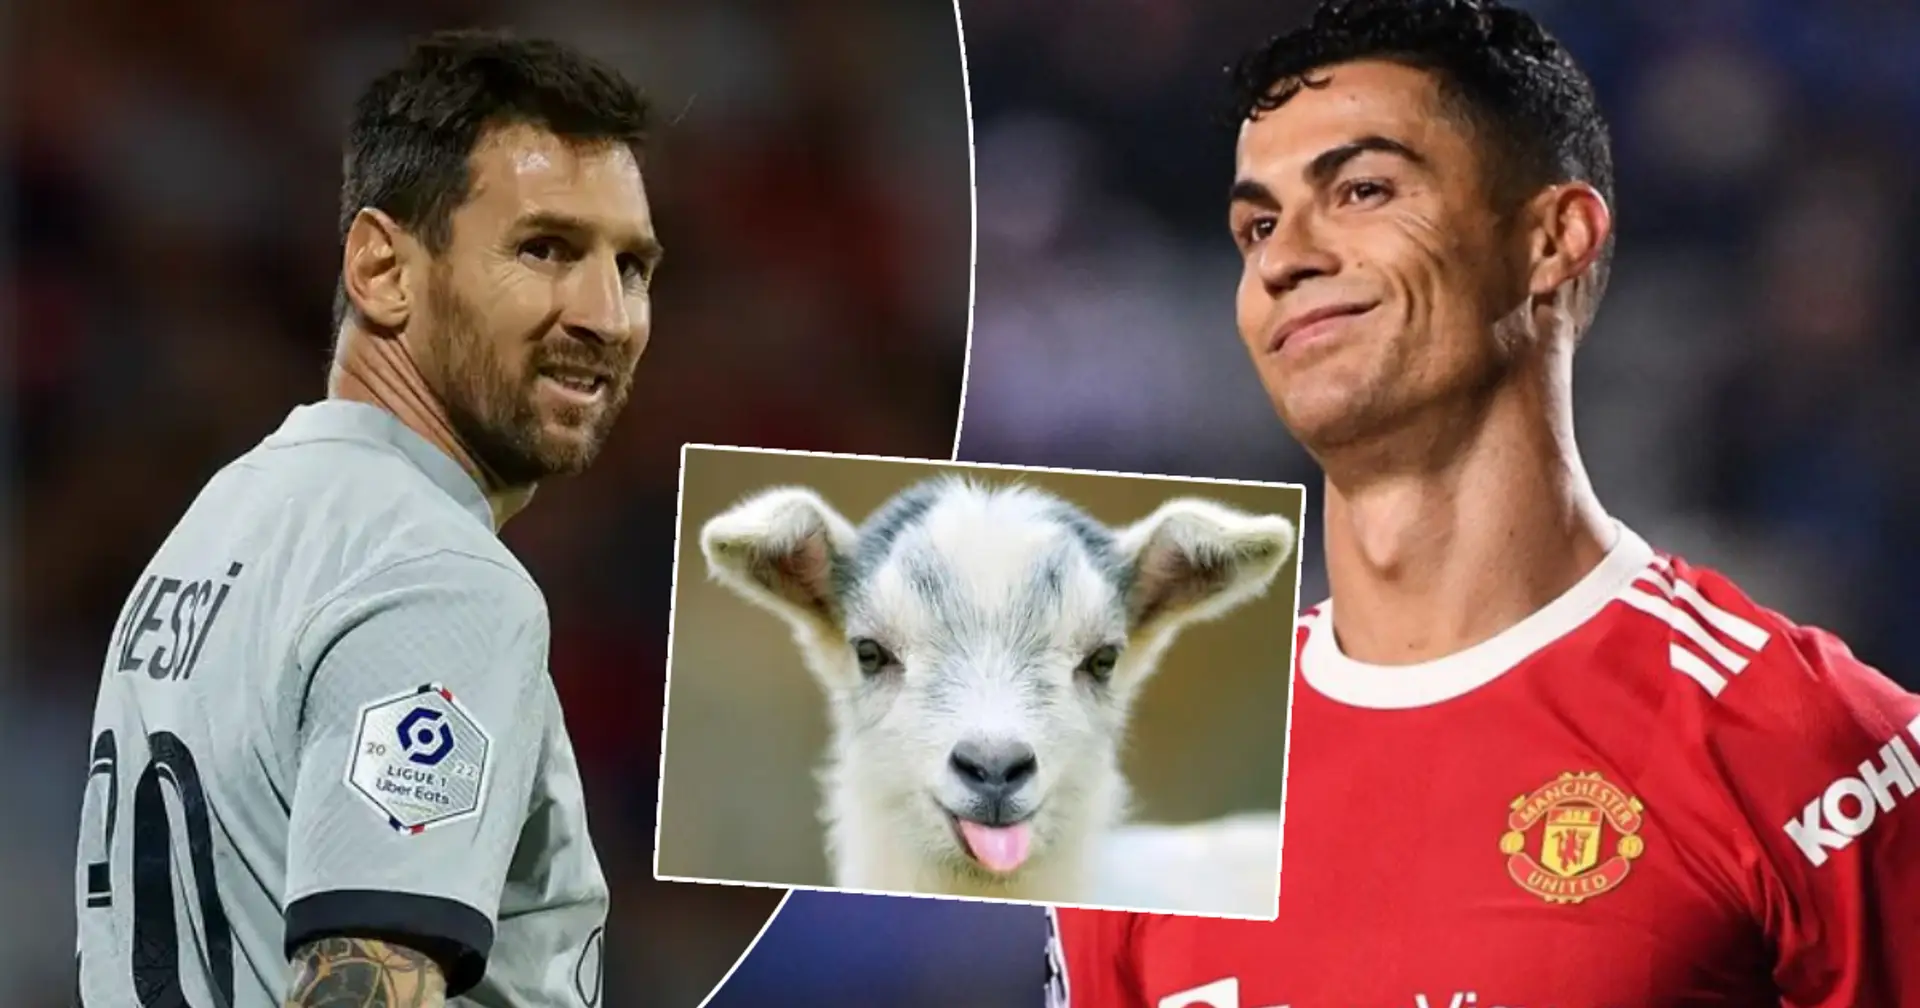 Who Is The Goat Of Football History? Image Credits:- Tribuna.